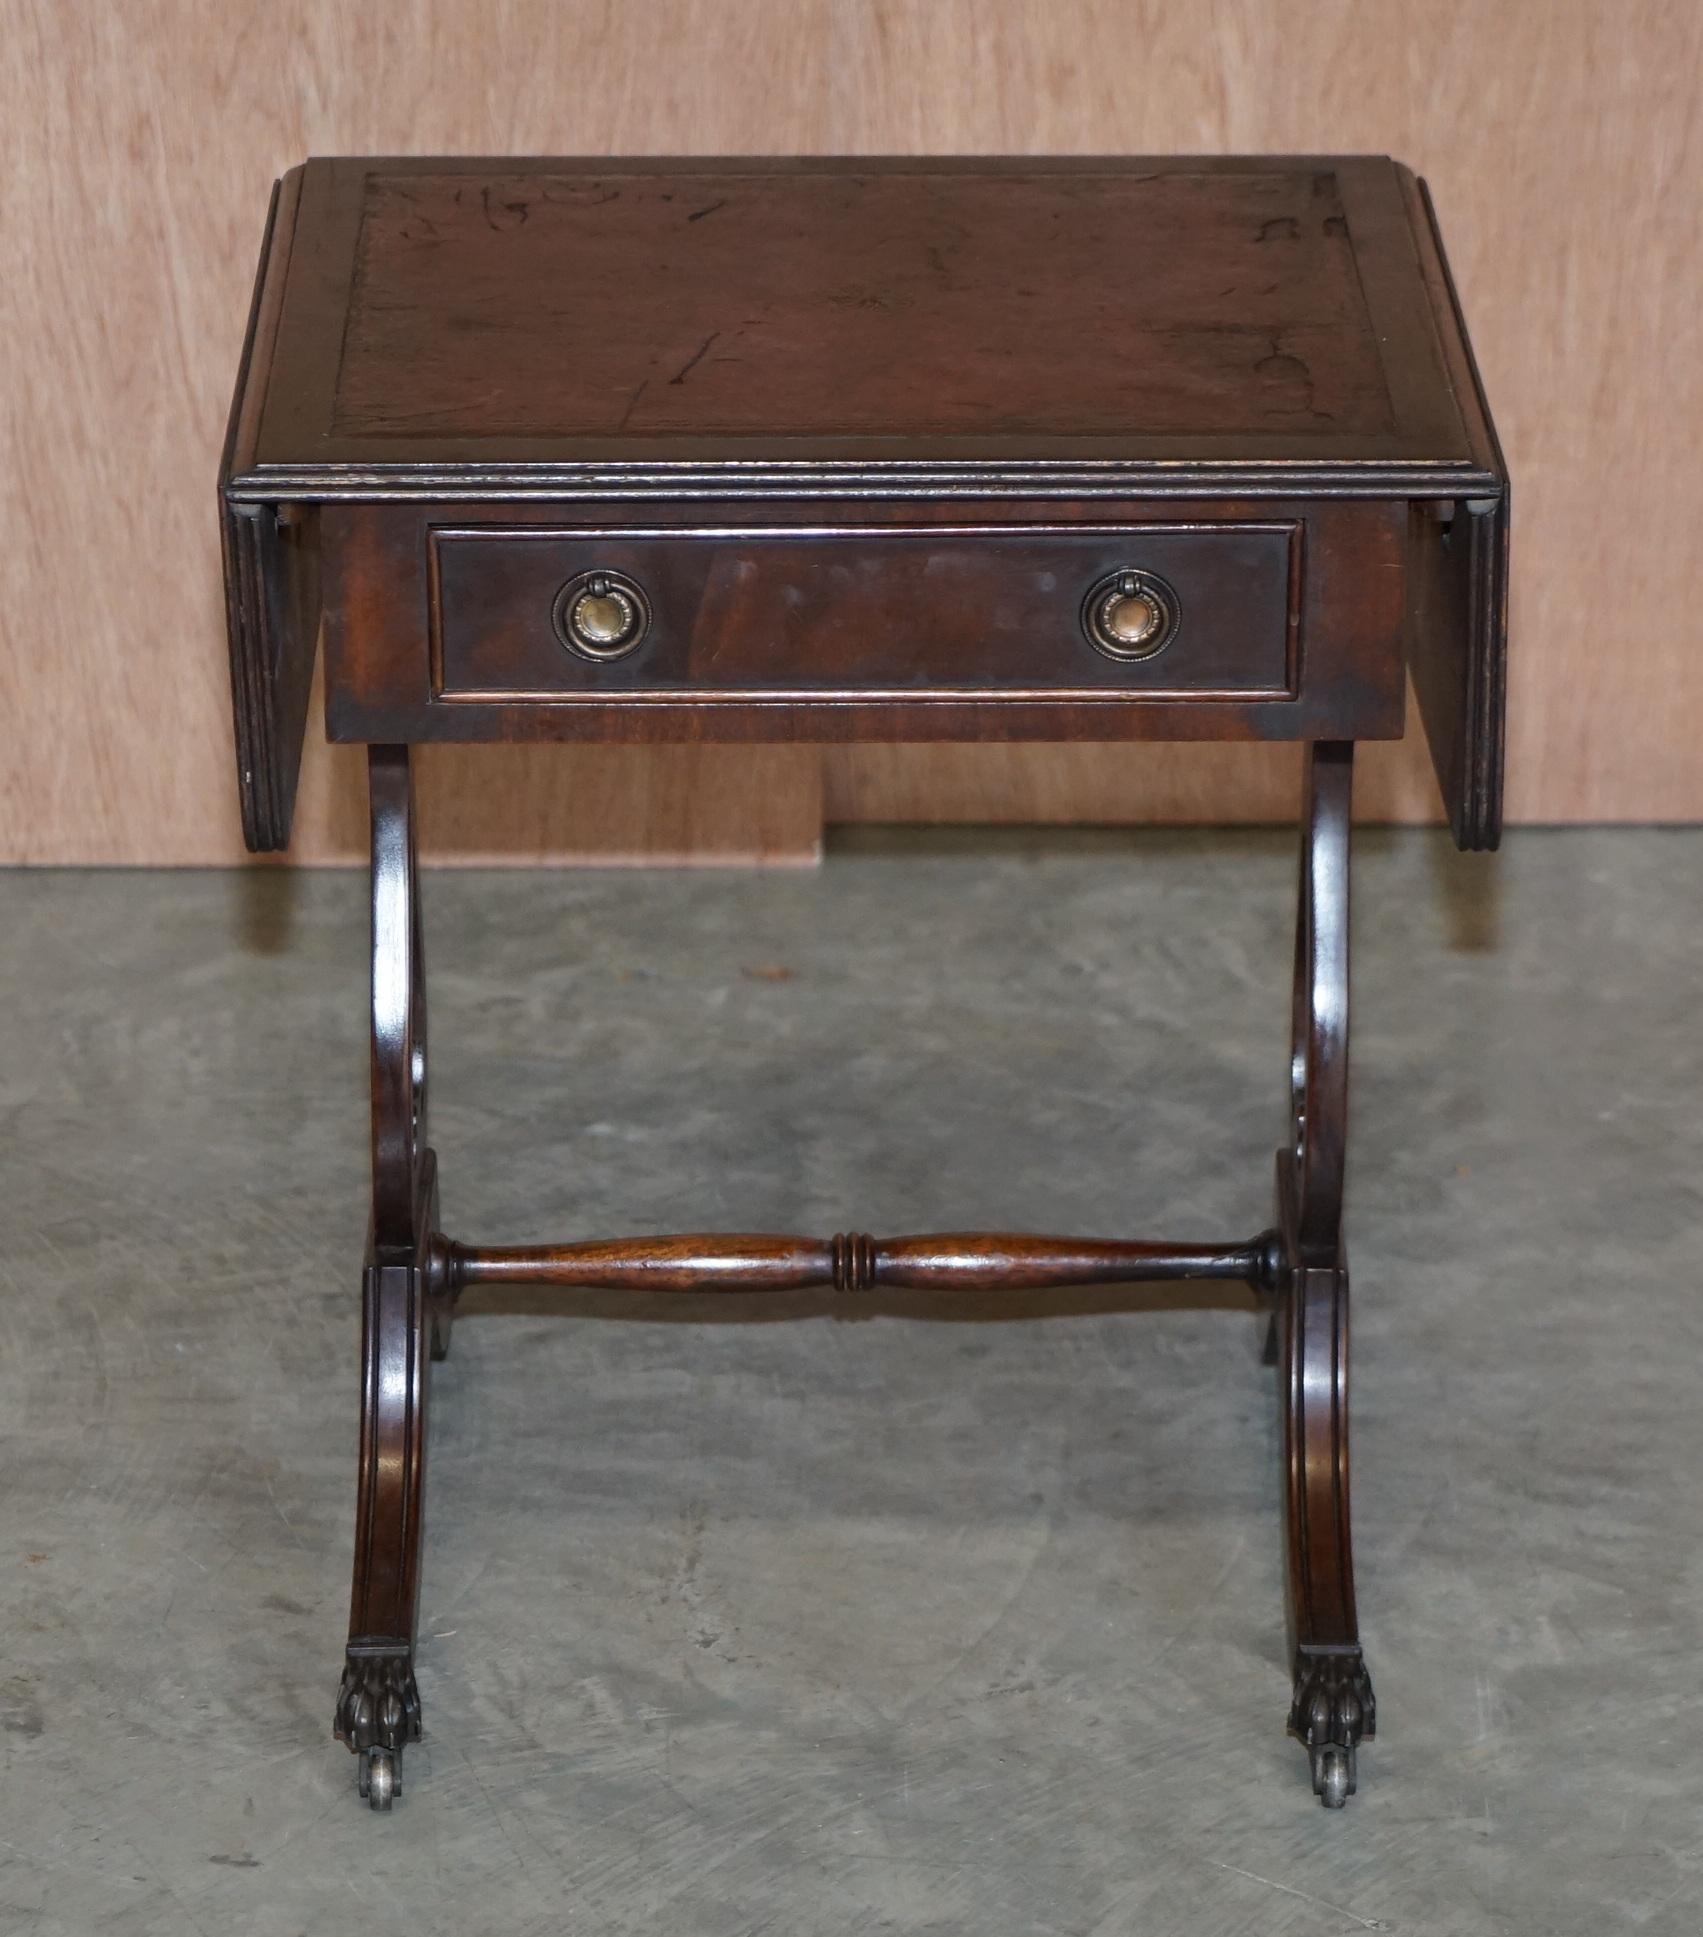 We are delighted to this lovely small Bevan Funnell vintage mahogany side table with extending oxblood leather top and single drawer

A very good looking and versatile piece, the table has single drawer to the front and false drawer to the back so